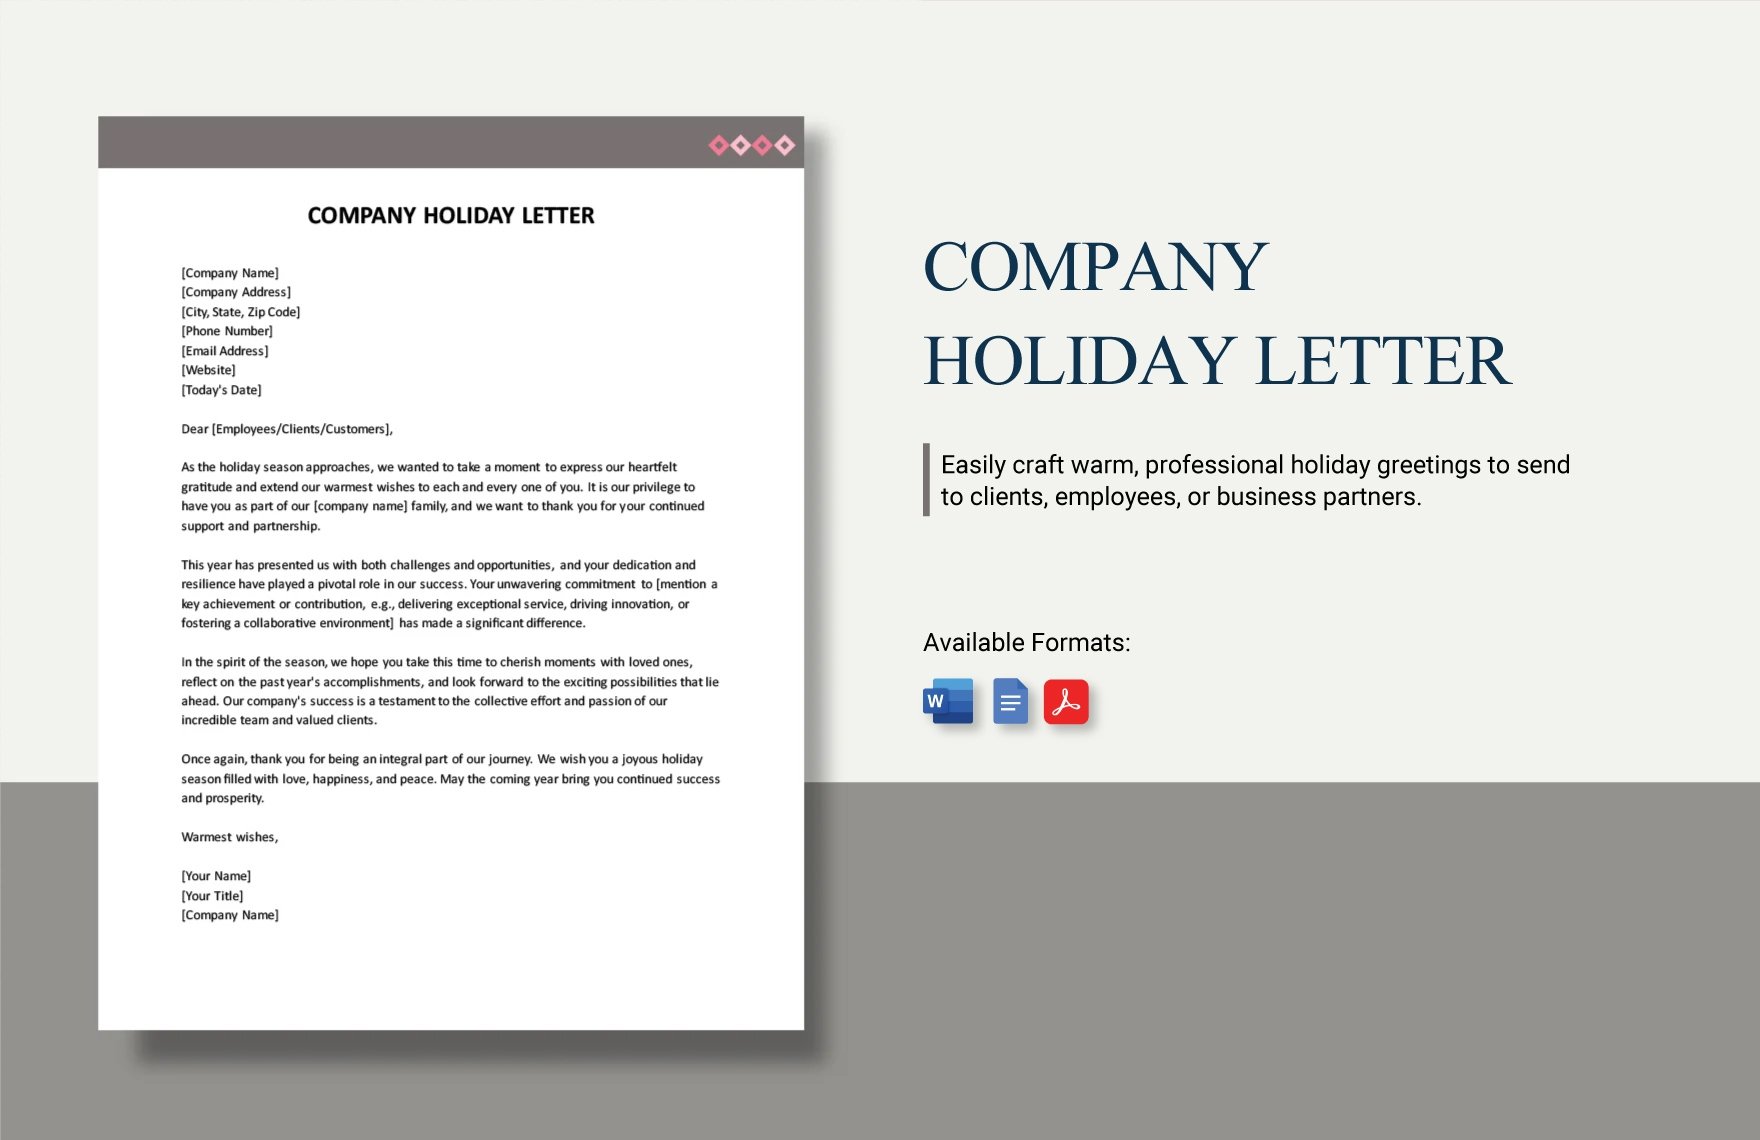 Company Holiday Letter in Word, Google Docs, PDF